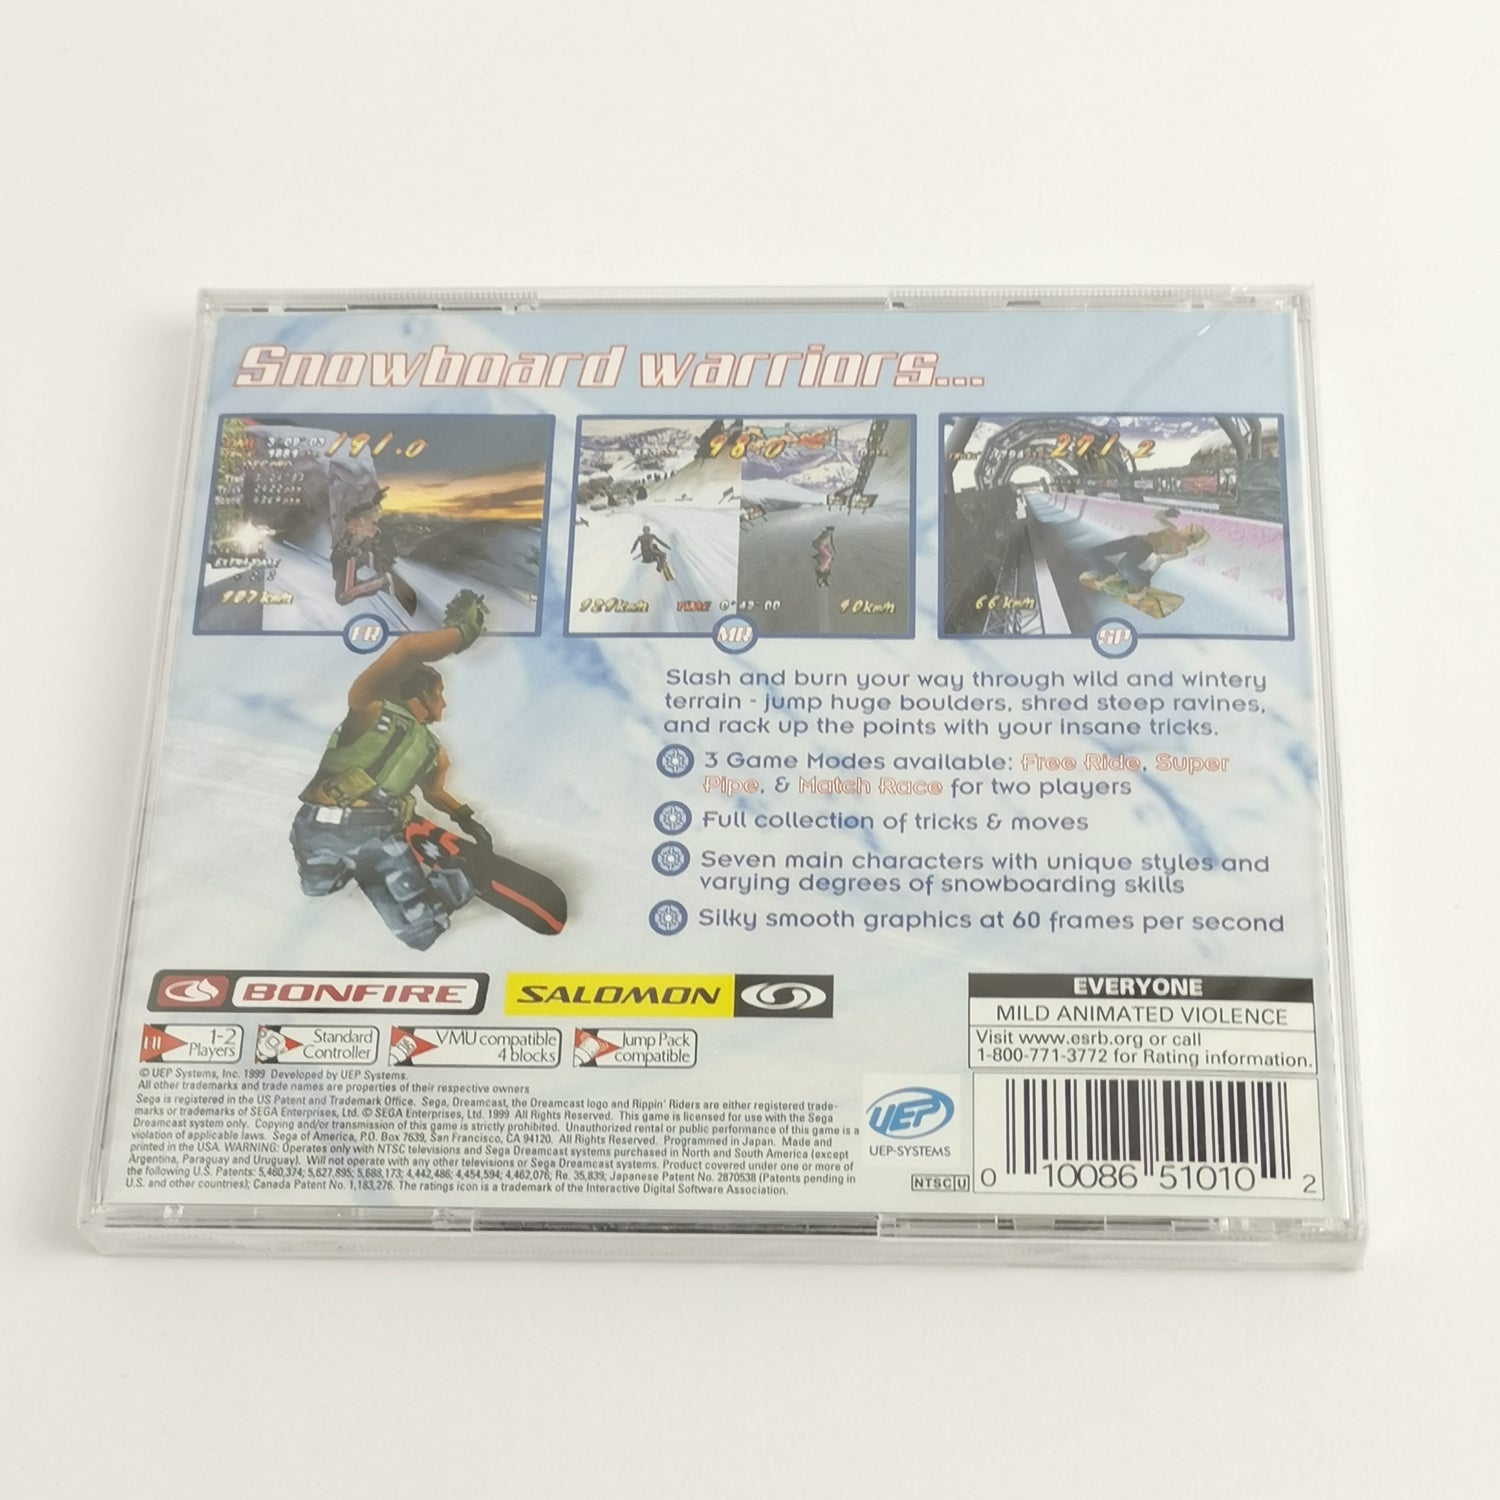 American Sega Dreamcast game: Rippin Riders Snowboarding NEW NEW SEALED